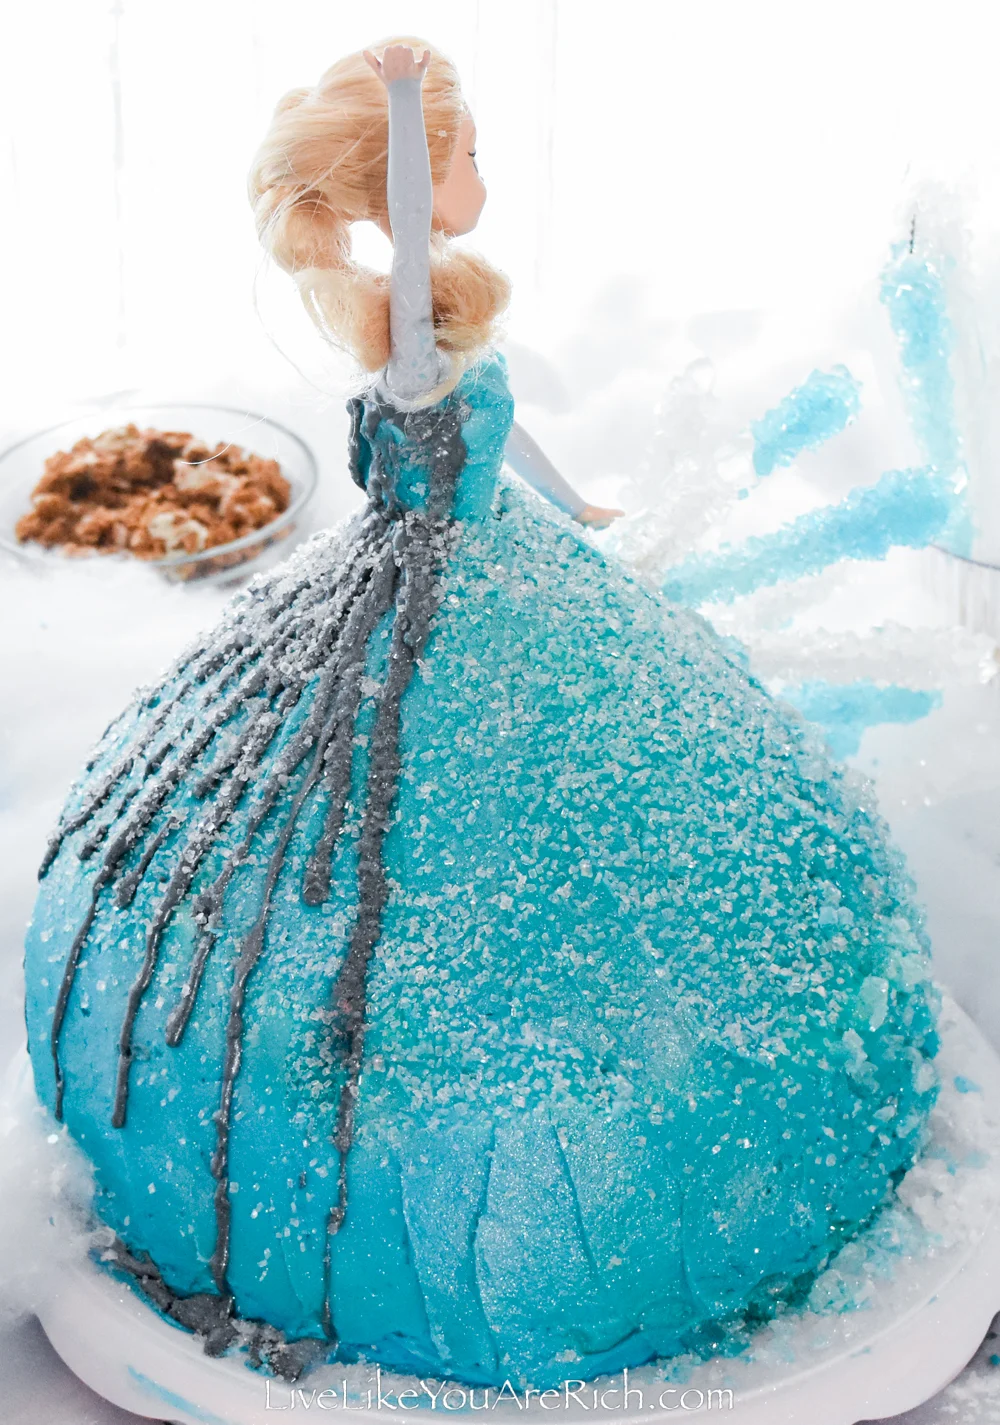 Anna Barbie Cake from the Movie Frozen - Live Like You Are Rich